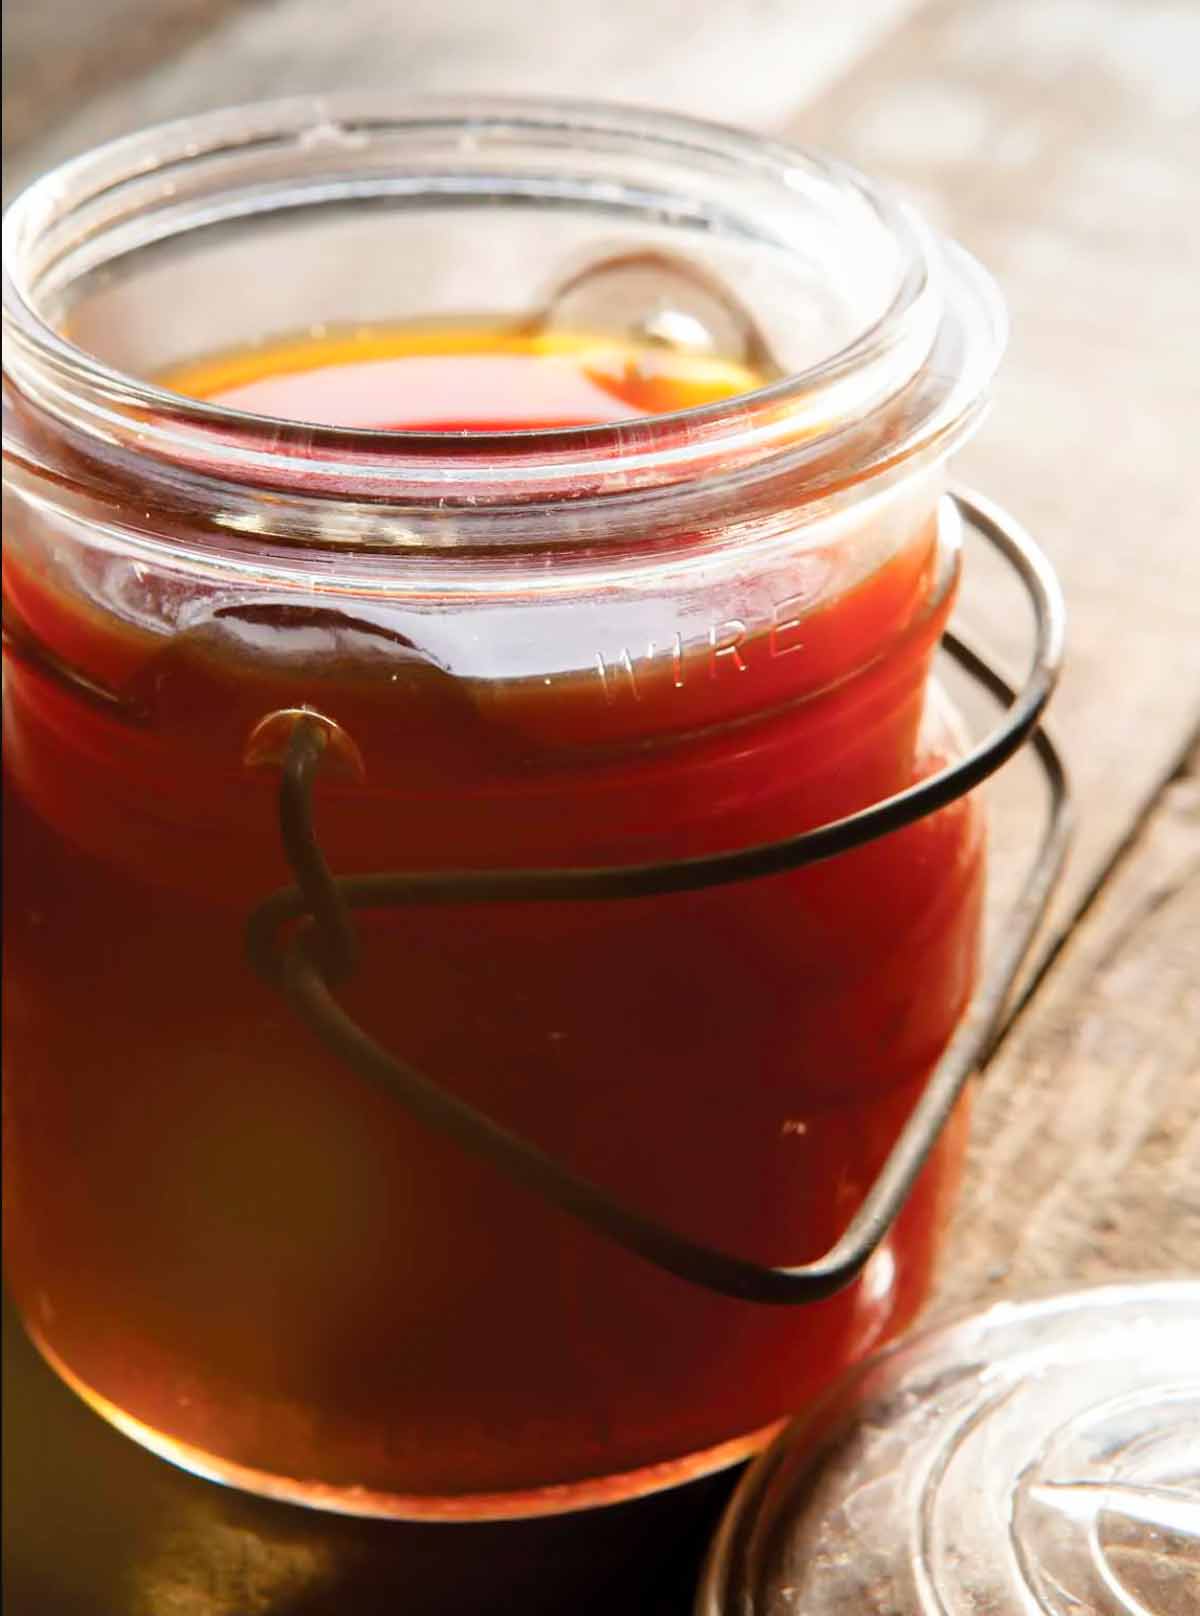 A glass jar filled with beef bone broth.